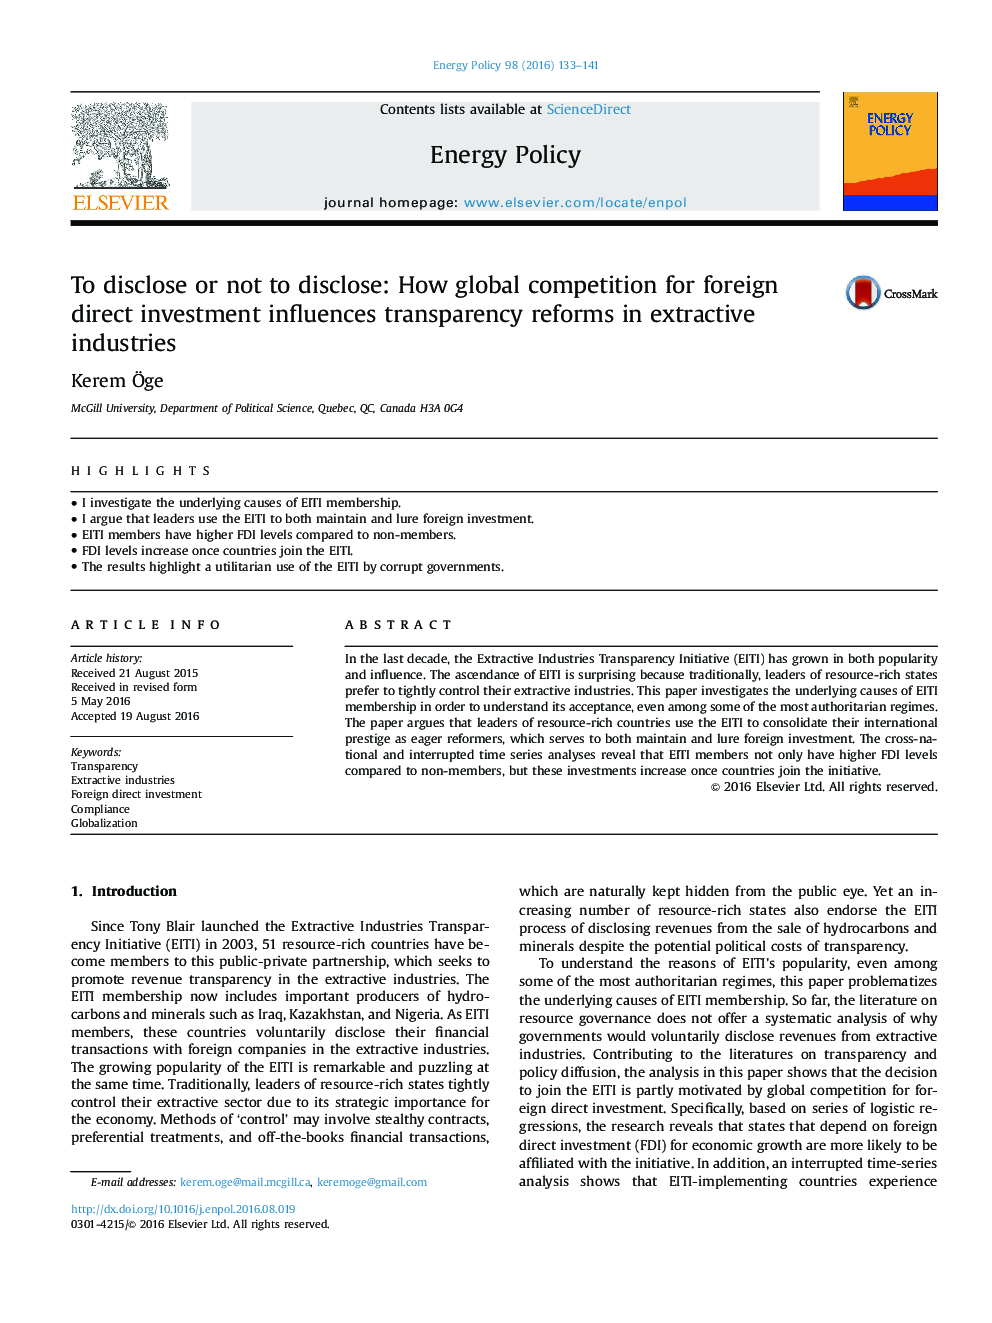 To disclose or not to disclose: How global competition for foreign direct investment influences transparency reforms in extractive industries